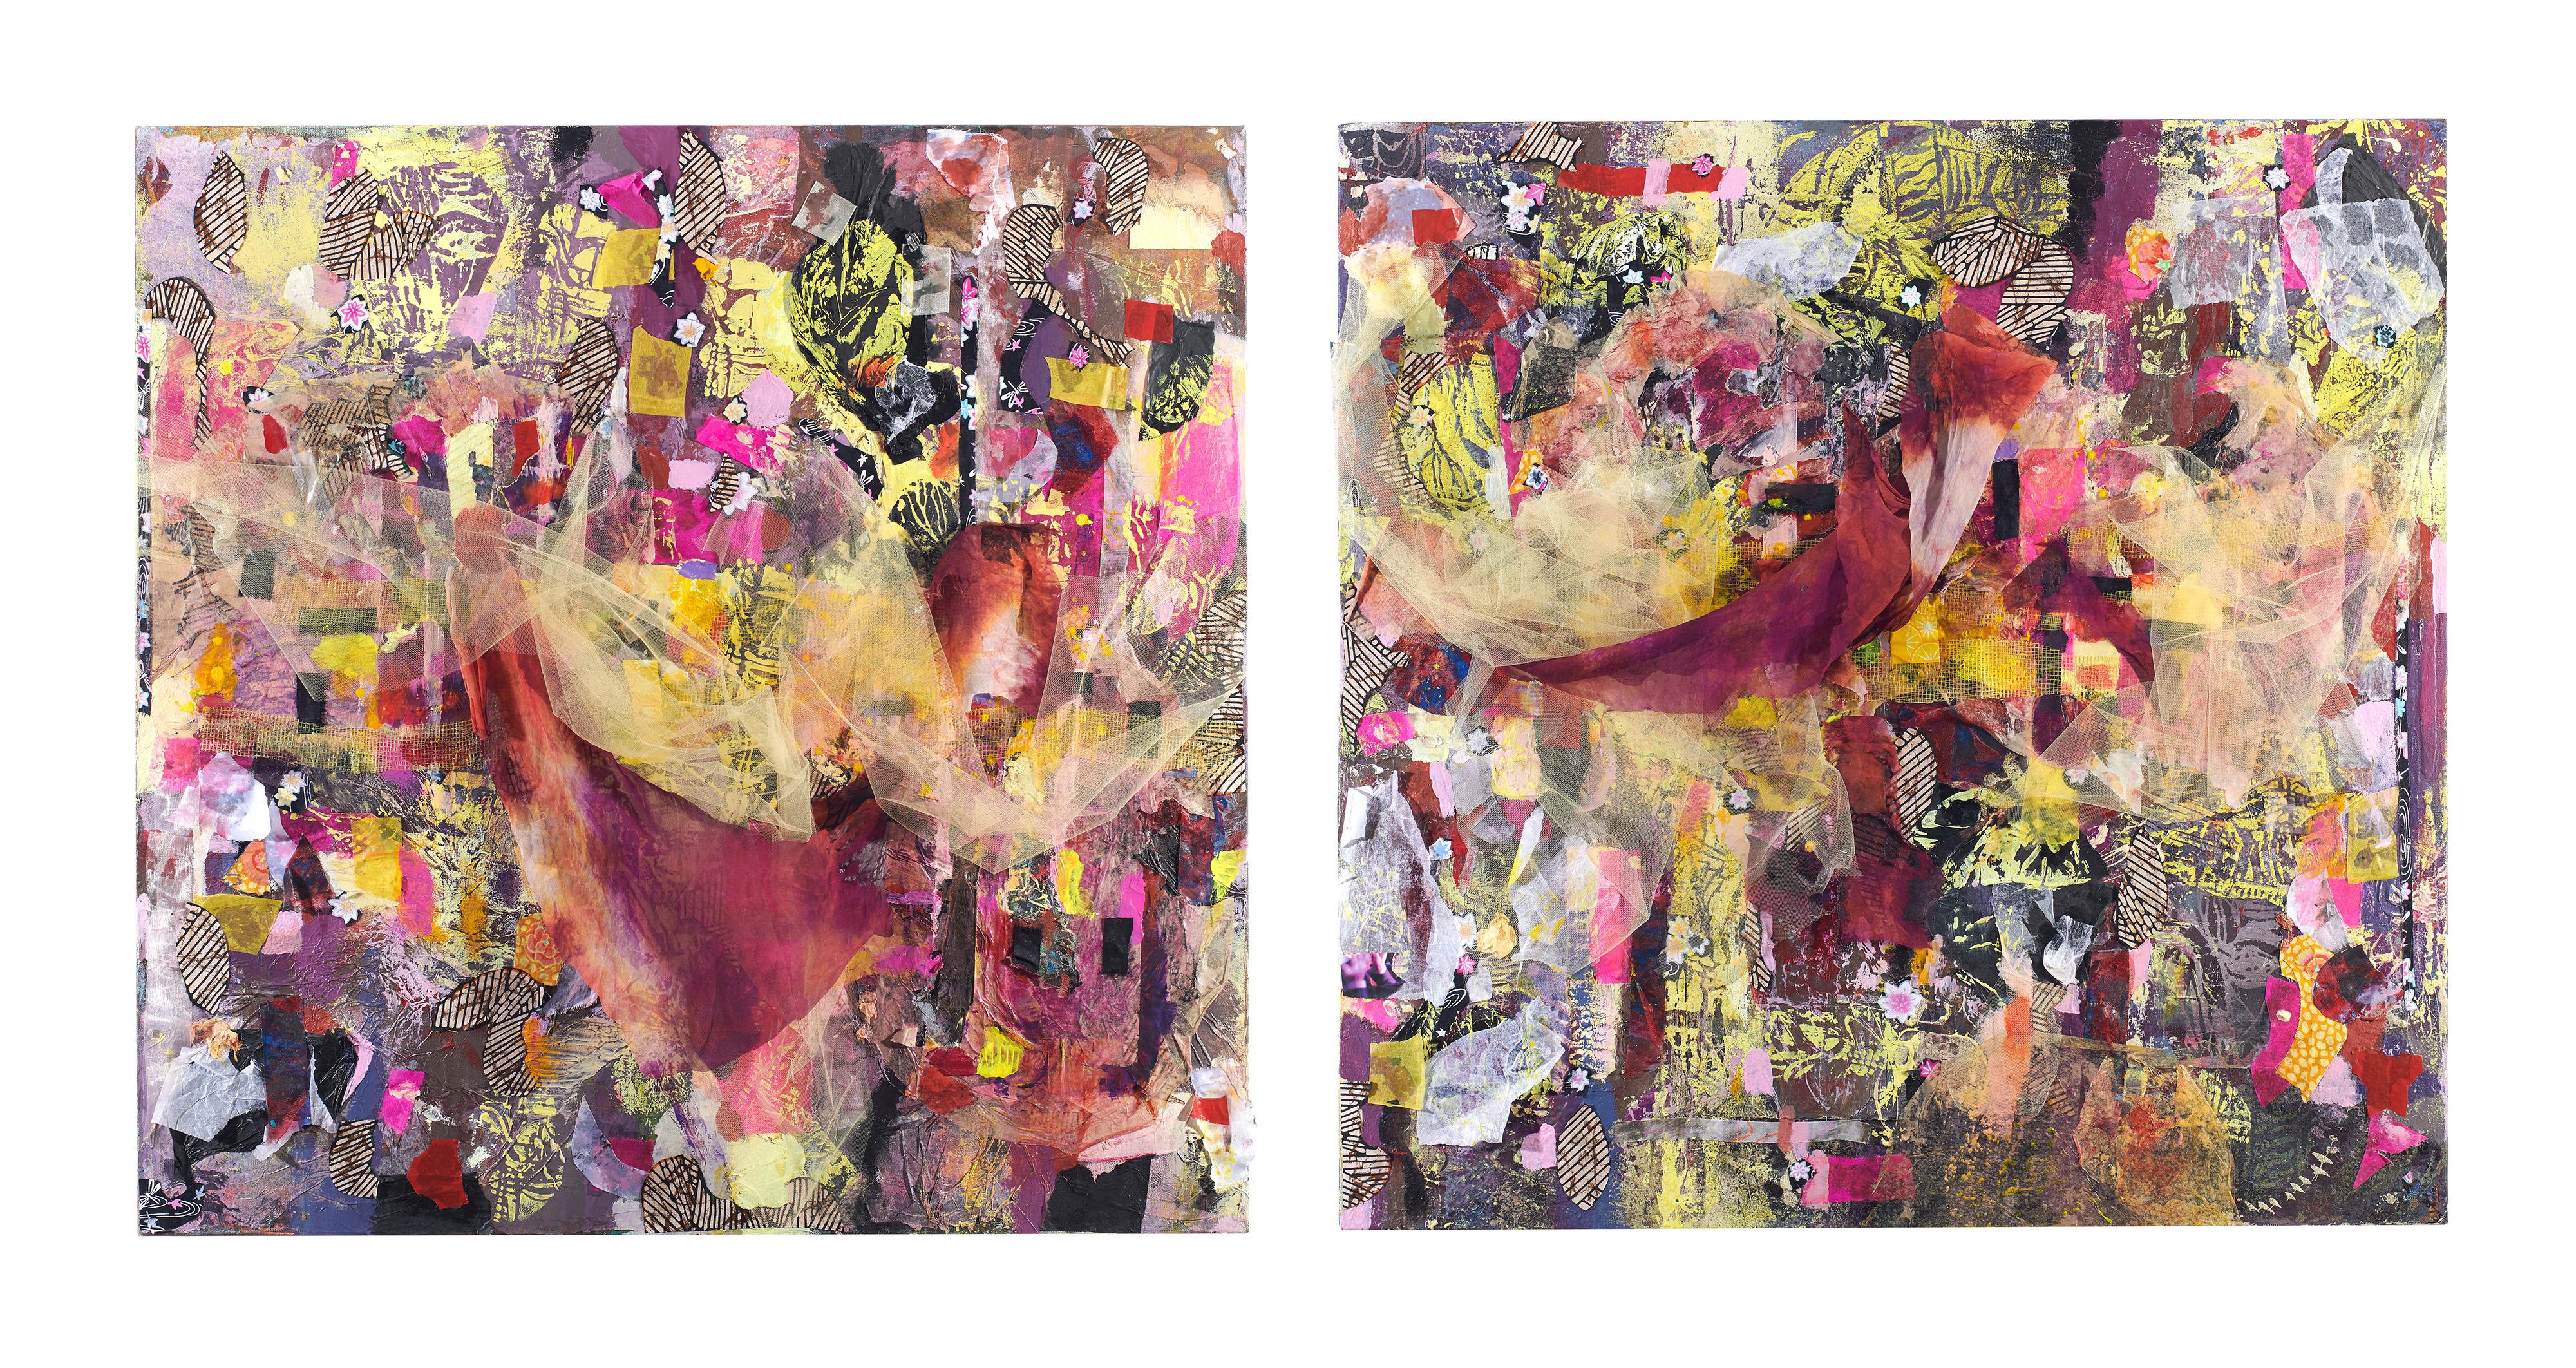 Information Overchoice - Eye Catching Mixed Media Diptych Black + Pink + Yellow - Contemporary Mixed Media Art by Jennifer Blalack